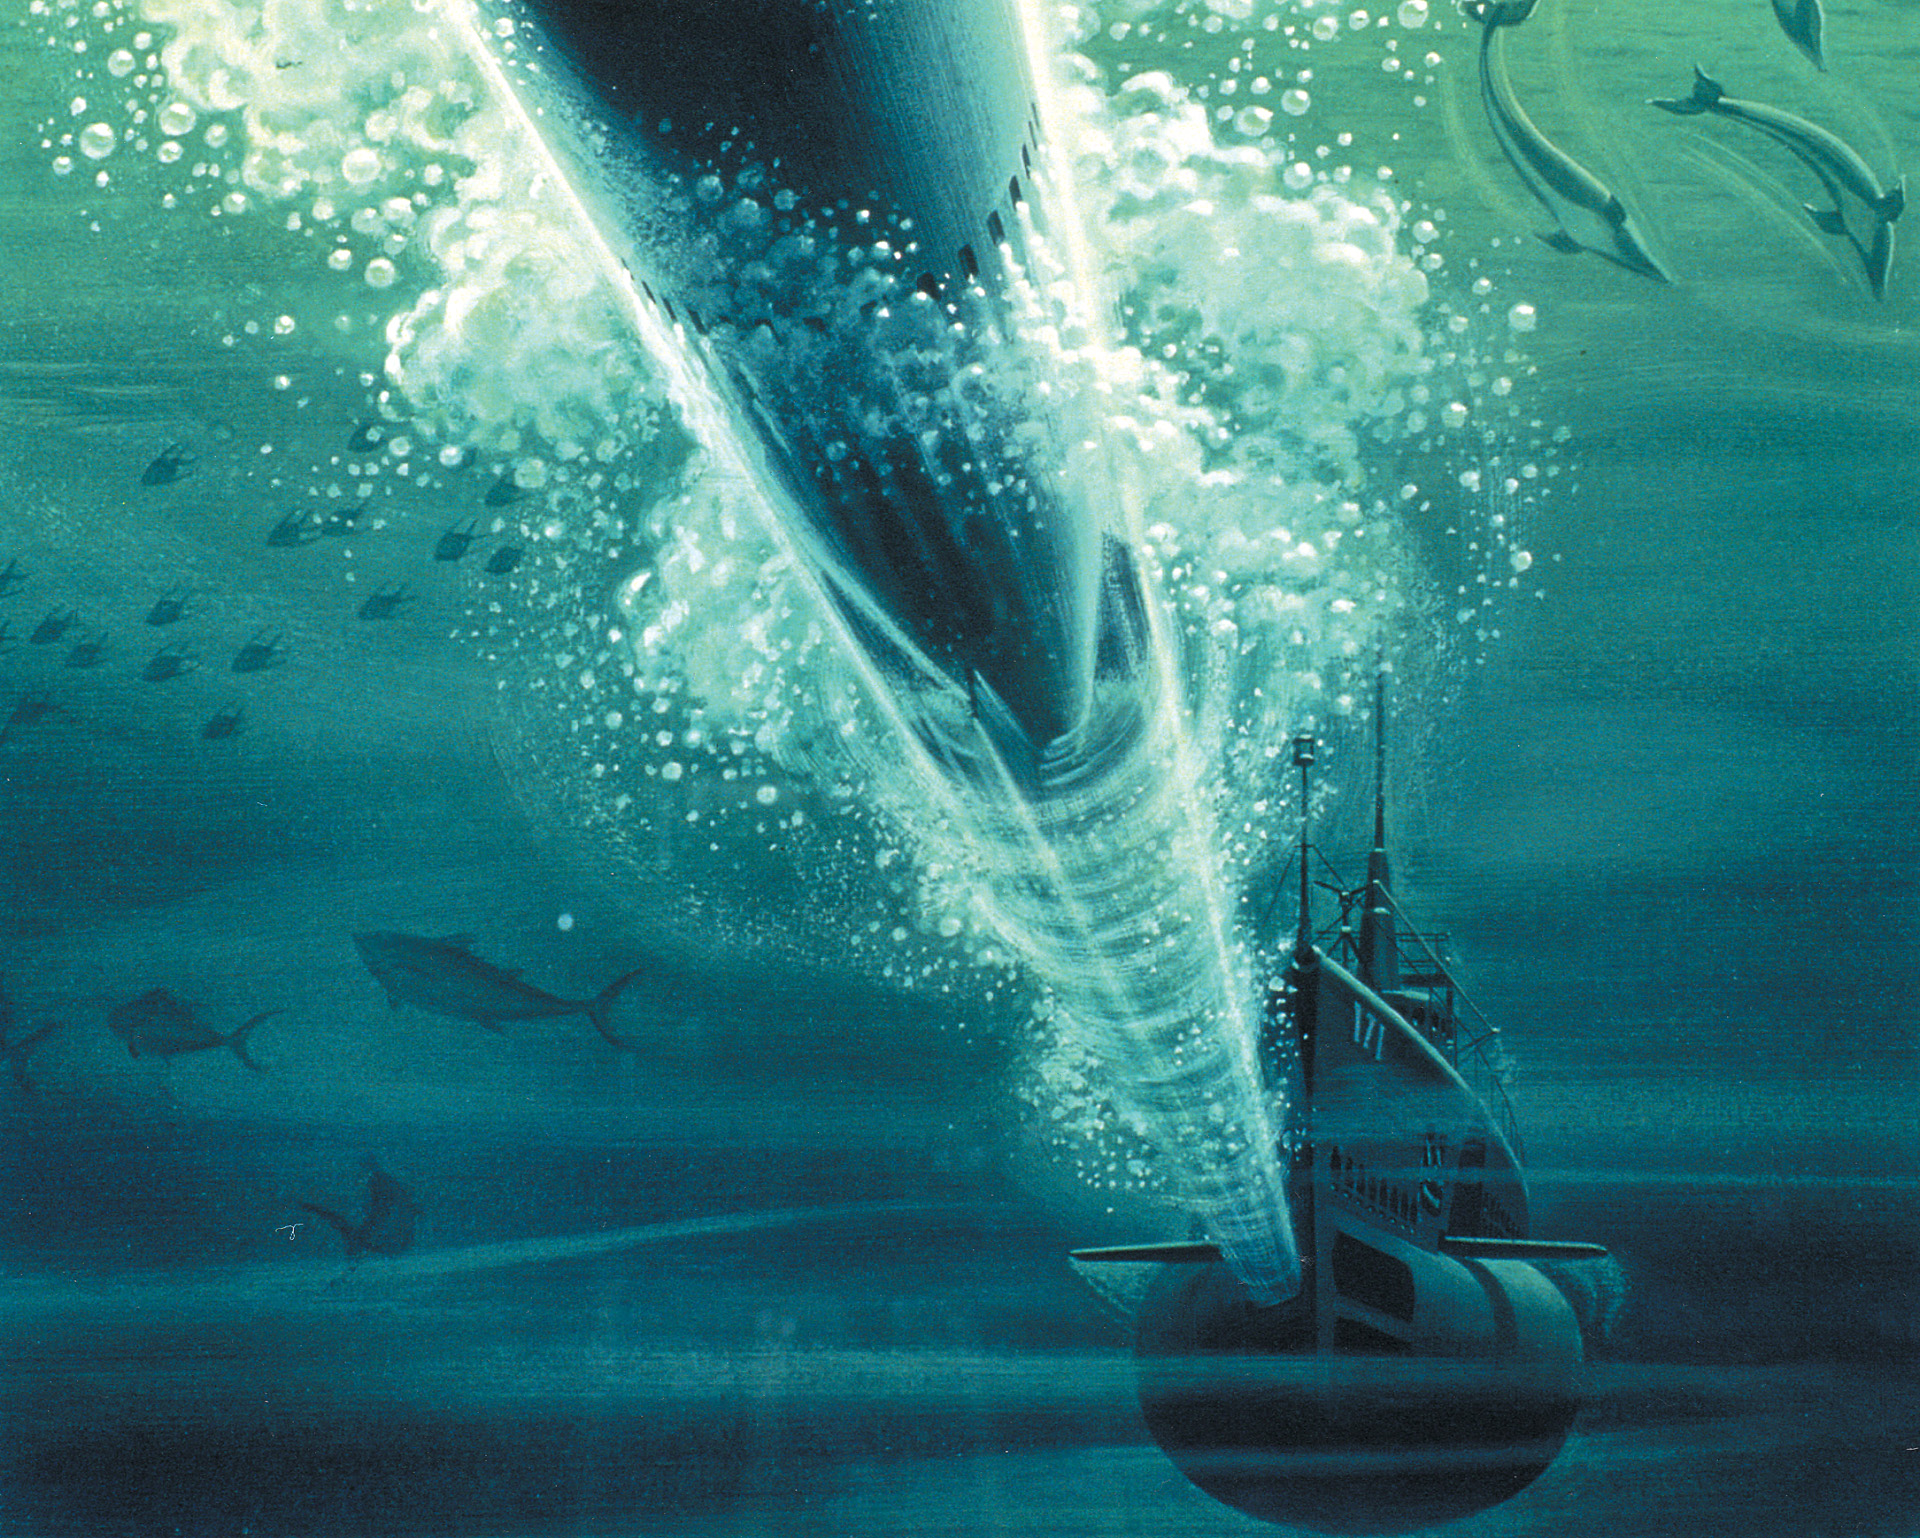 In an artist’s rendering, a deadly “tin fish” hisses towards a distant target.